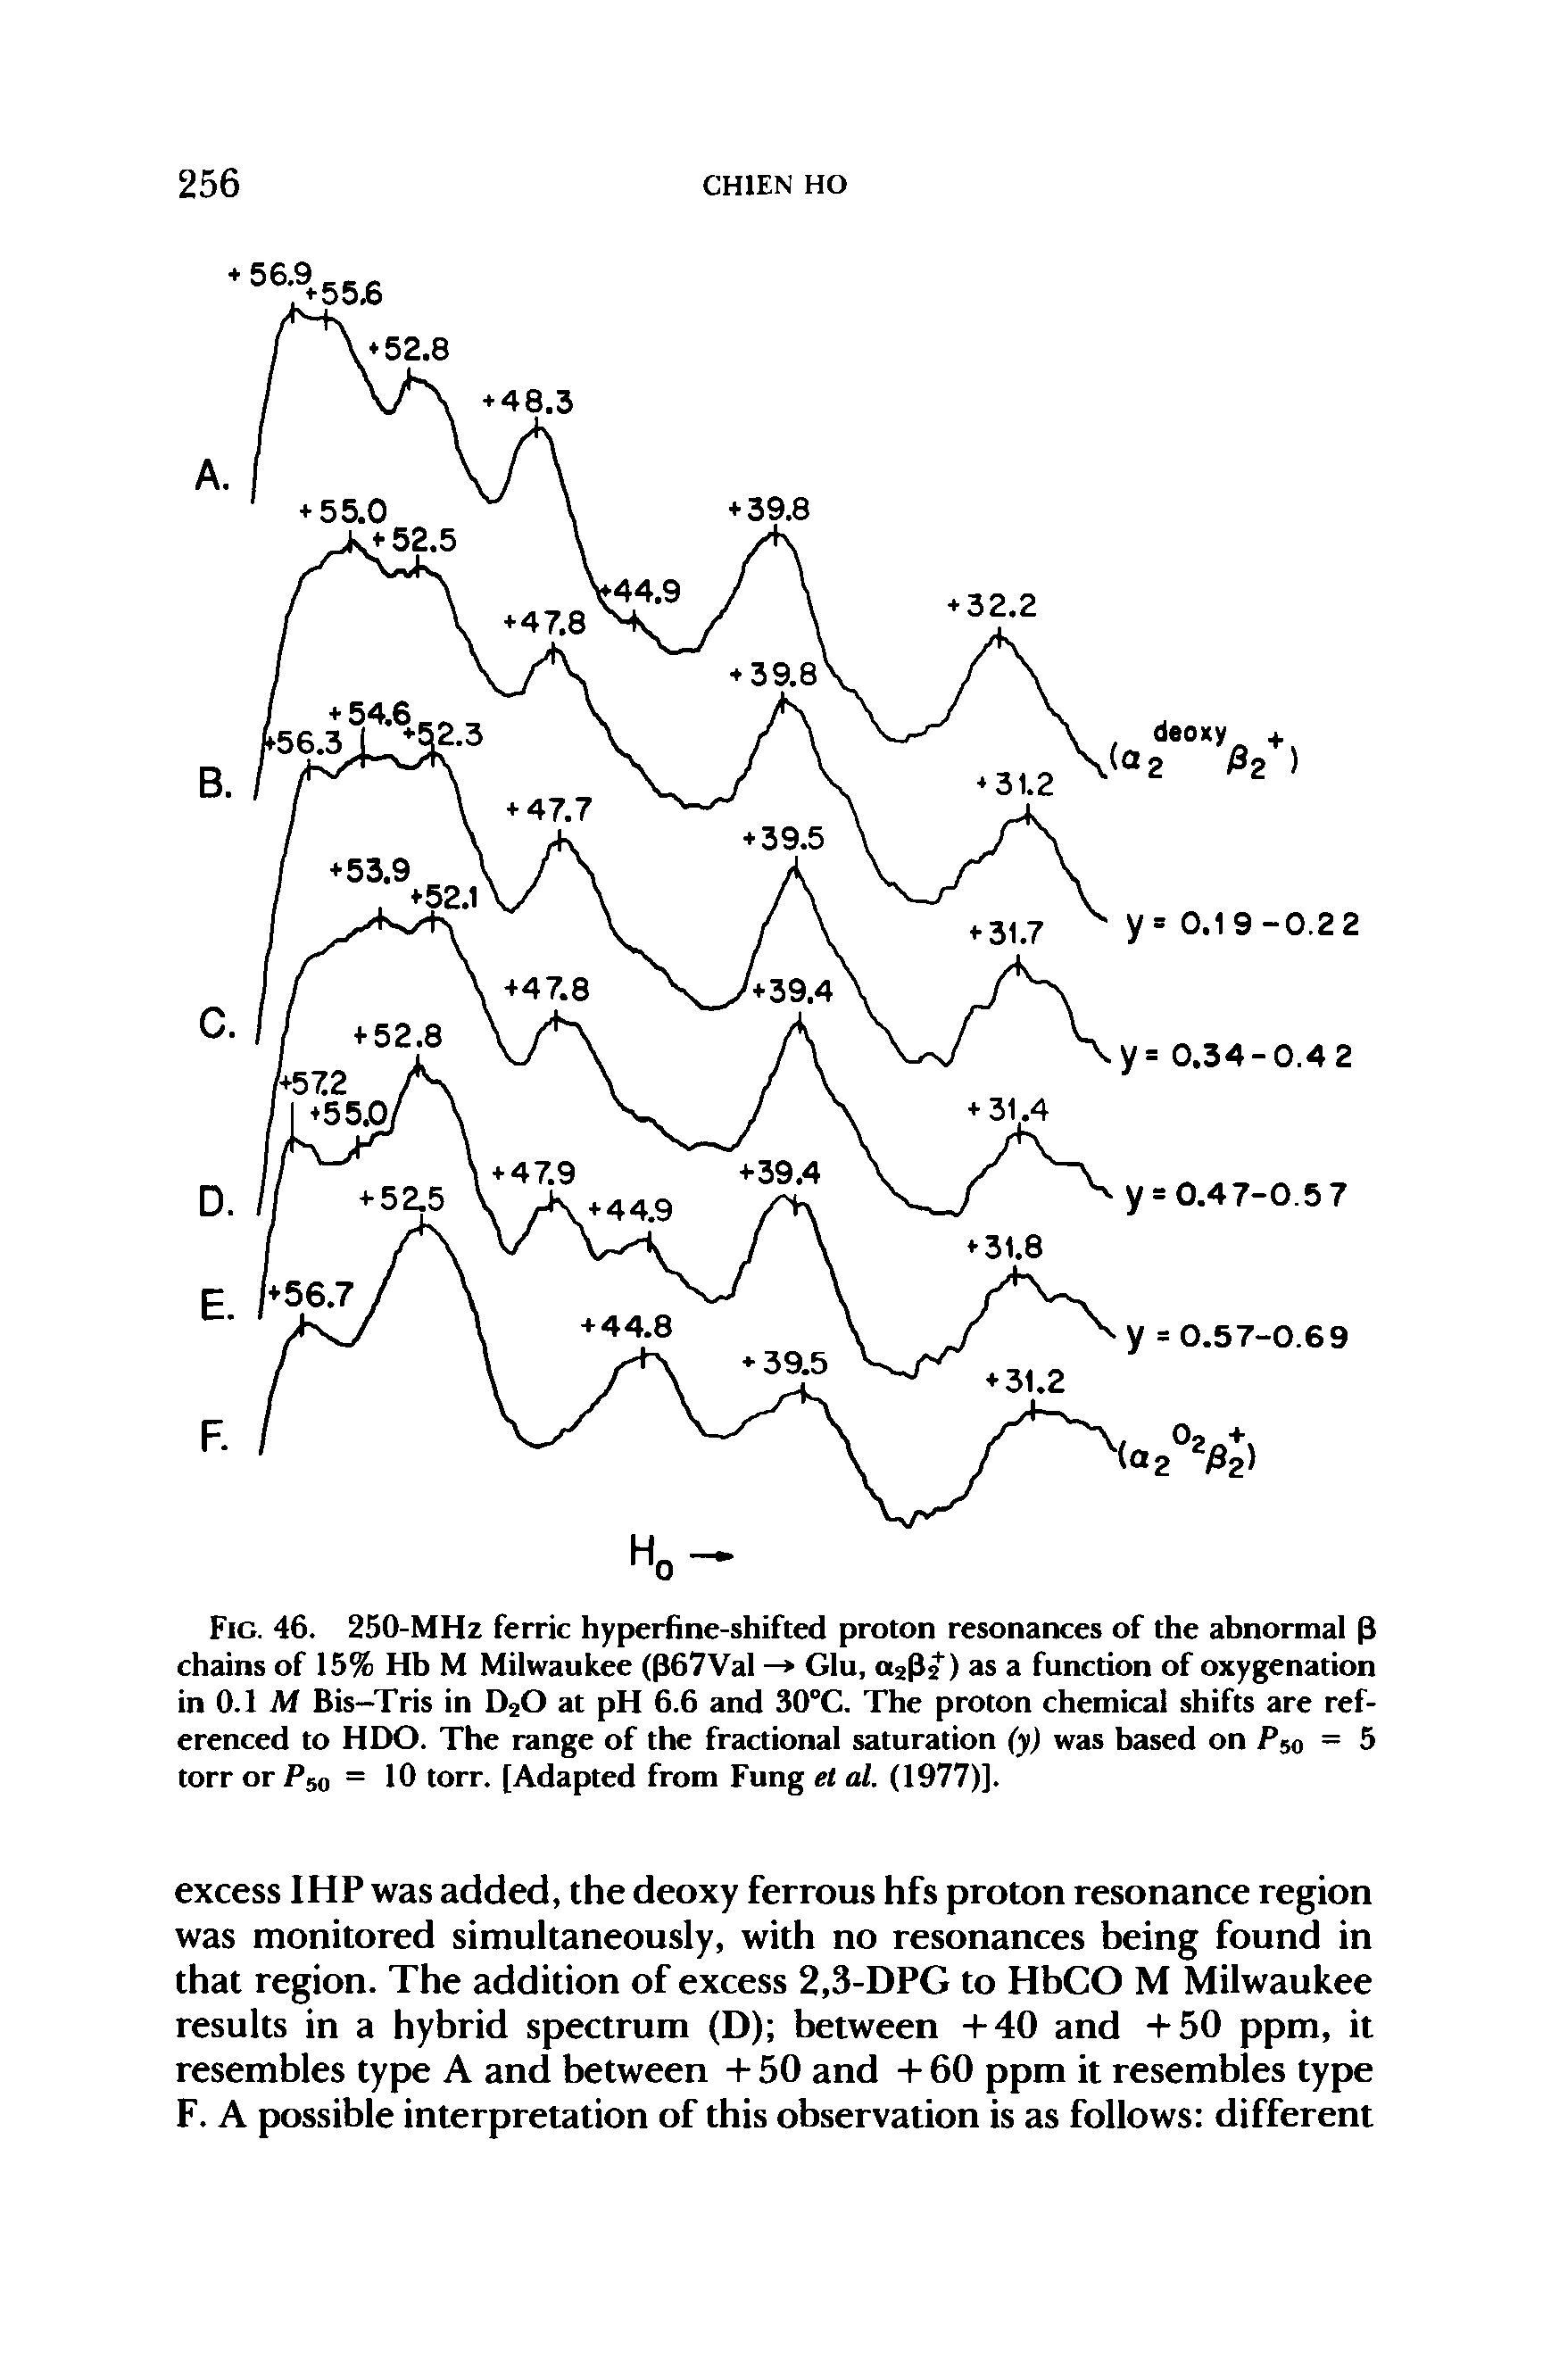 Fig. 46. 250-MHz ferric hyperfine-shifted proton resonances of the abnormal p chains of 15% Hb M Milwaukee (p67Val — Glu, a2p2) as a function of oxygenation in 0.1 M Bis—Tris in D20 at pH 6.6 and 30°C. The proton chemical shifts are referenced to HDO. The range of the fractional saturation (y) was based on P50 = 5 torr or P5 = 10 torr. [Adapted from Fung et al. (1977)].